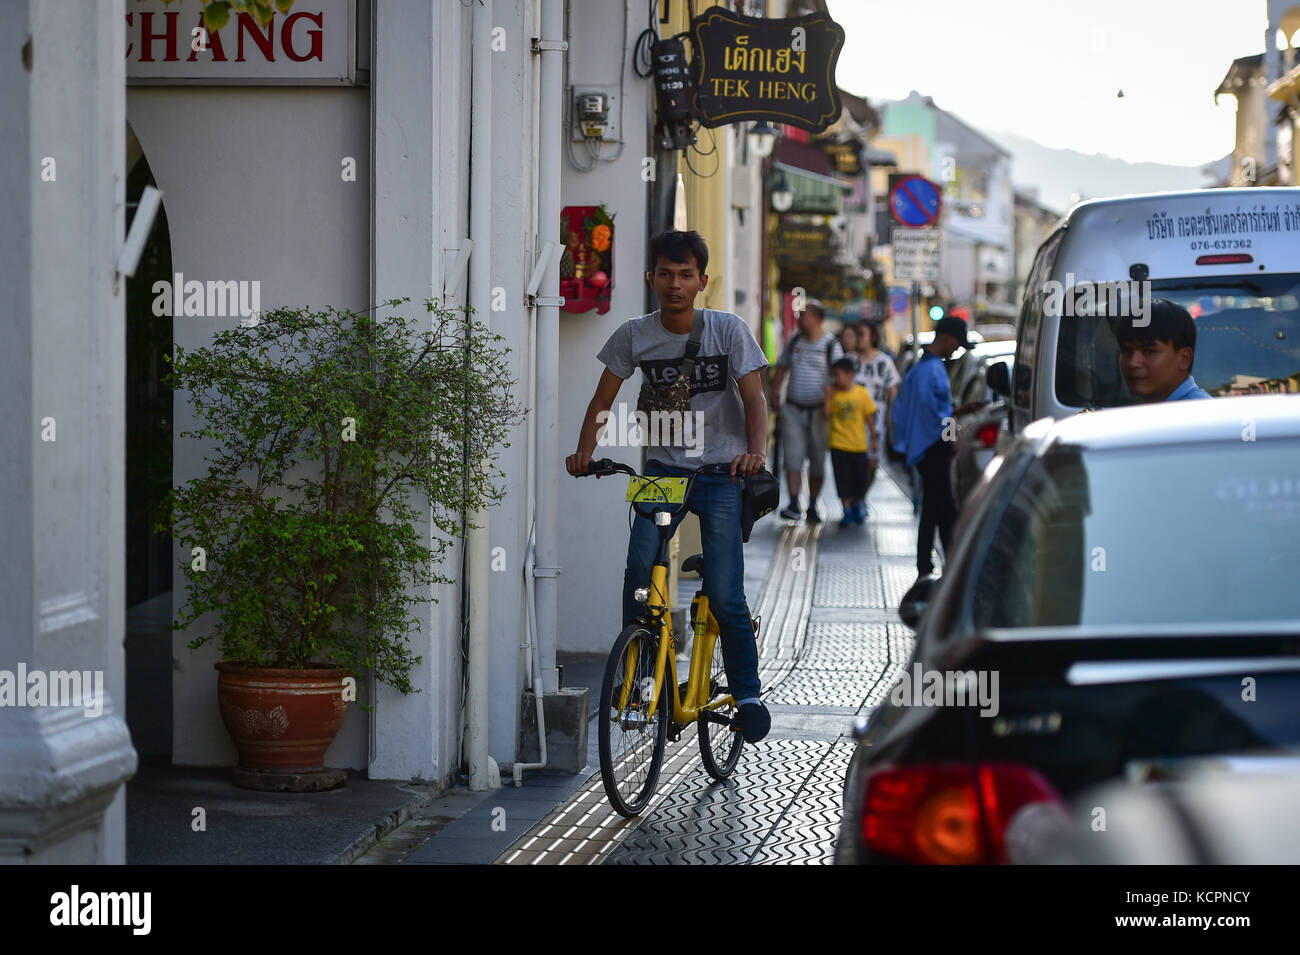 Phuket, Thailand. 5th Oct, 2017. A man rides an ofo sharing-bike at a commercial area in Phuket, Thailand, Oct. 5, 2017. China's dock-less bike-sharing company ofo provided more than 1,000 bikes in Phuket's key locations in late September and offered a 1-month free trial without deposit fee. Now the bike-sharing service has benefited local residents and tourists. Ofo's regular service fee will be charged at 5 Baht per 30 minutes usage, with a deposit fee of 99 Baht. Credit: Li Mangmang/Xinhua/Alamy Live News Stock Photo